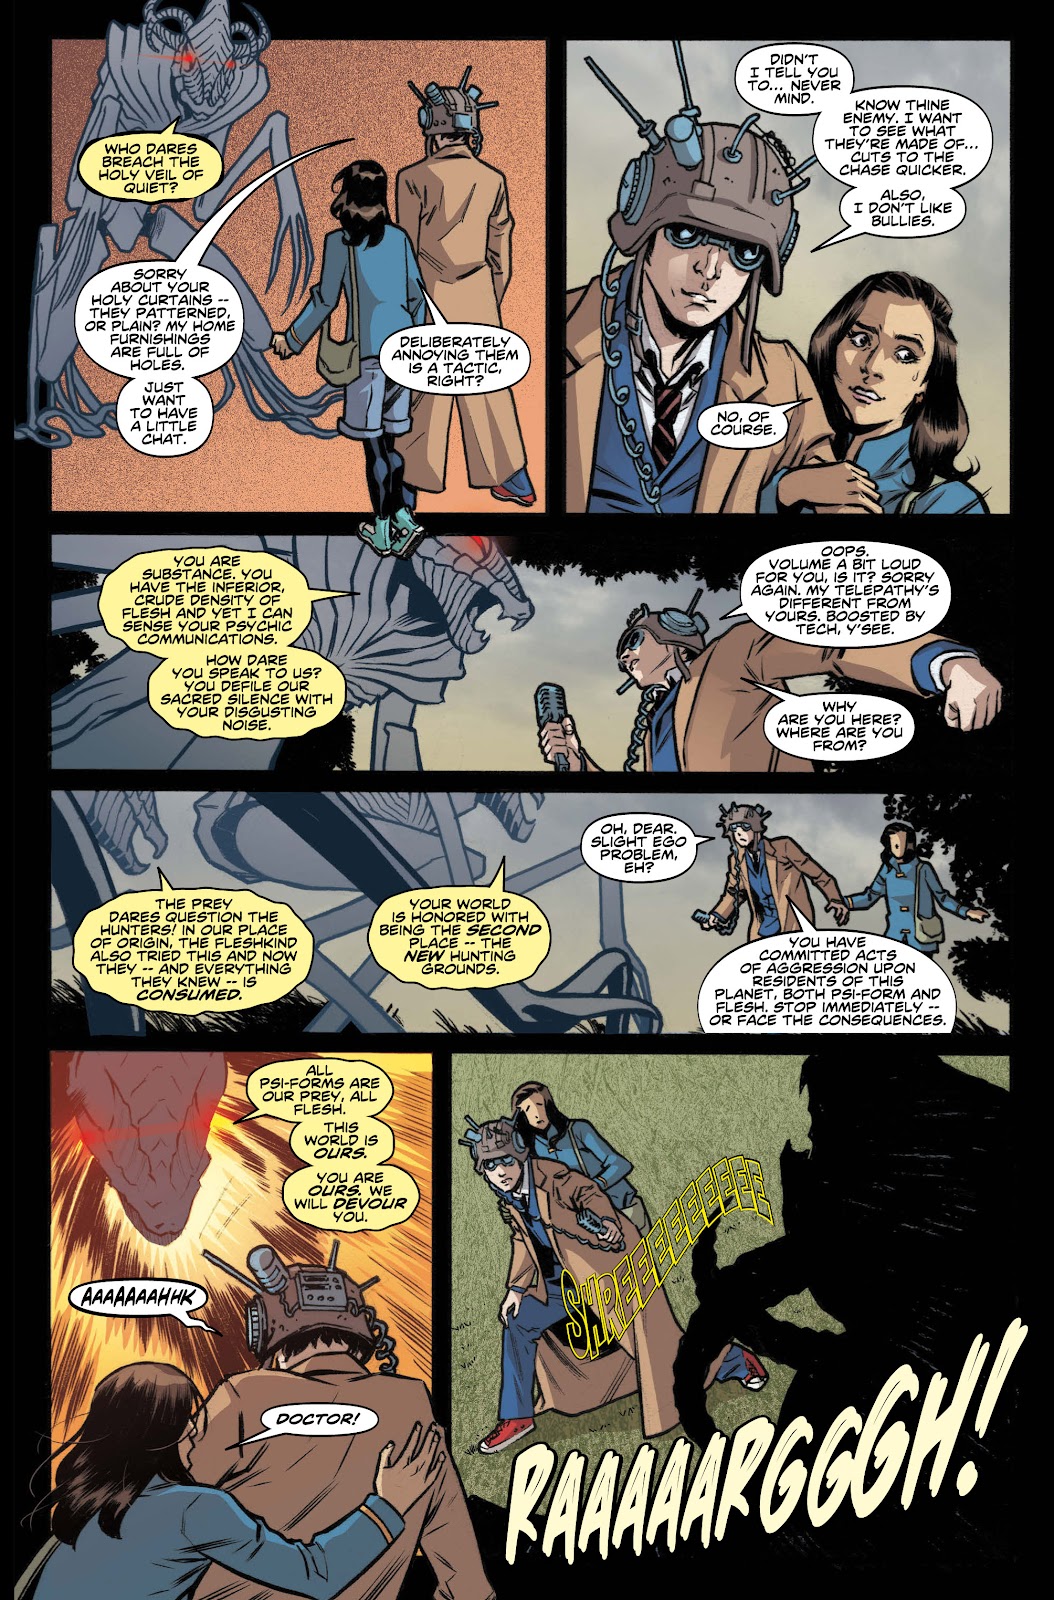 Doctor Who: The Tenth Doctor issue 2 - Page 19